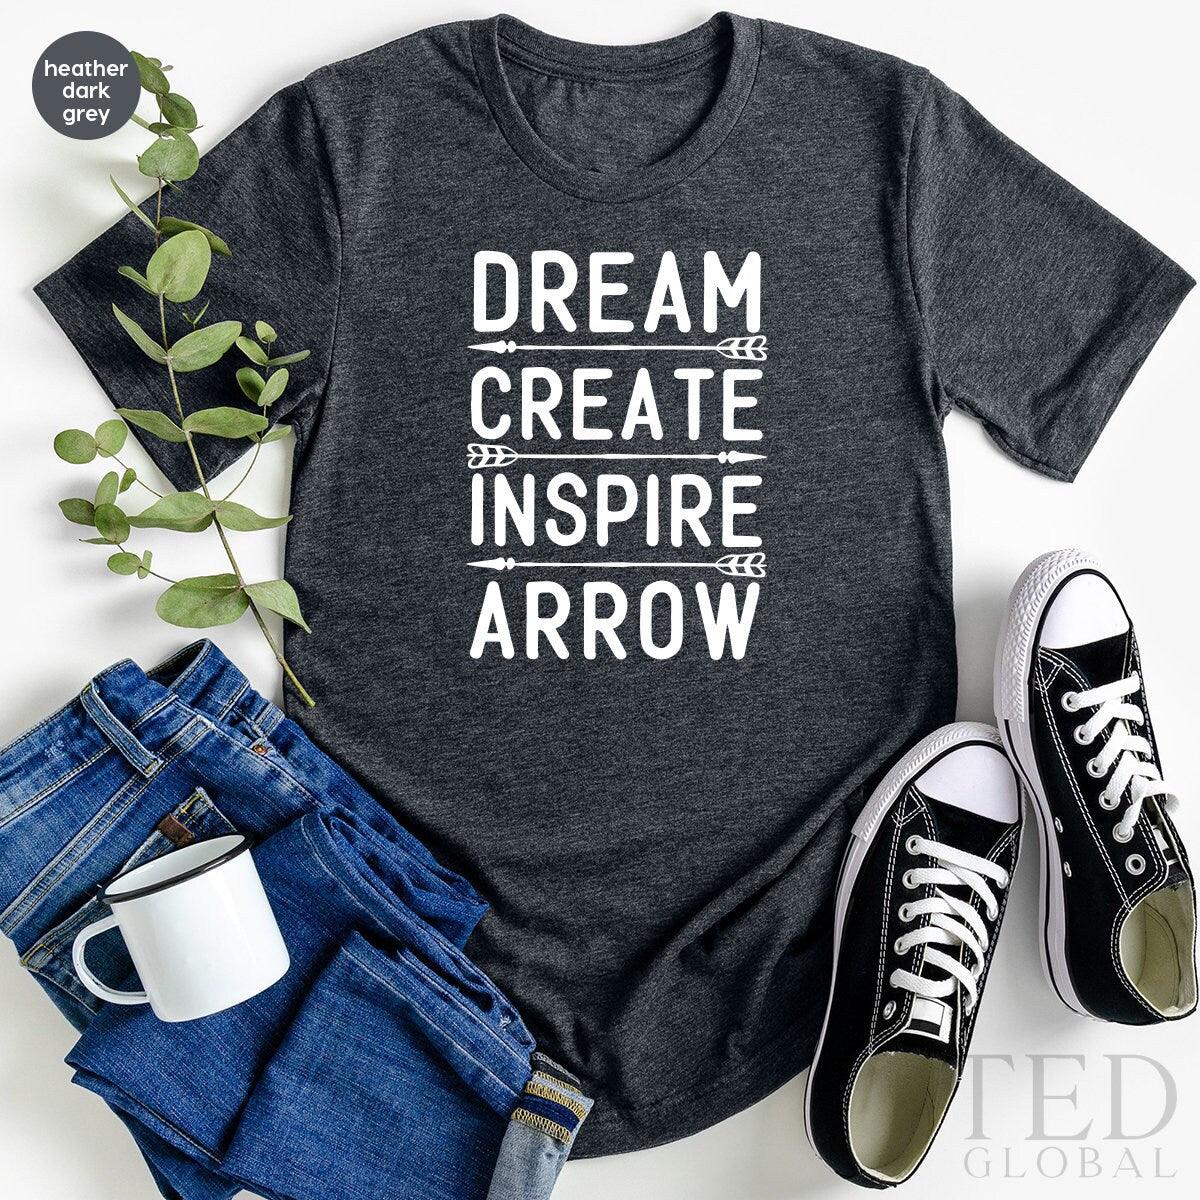 Archery T-Shirt For Girl, Shooting Lover TShirt, Cool Archer Shirt, Inspirational T Shirt, Gift For Bow Hunters,  Dream Create Inspire Tees - Fastdeliverytees.com